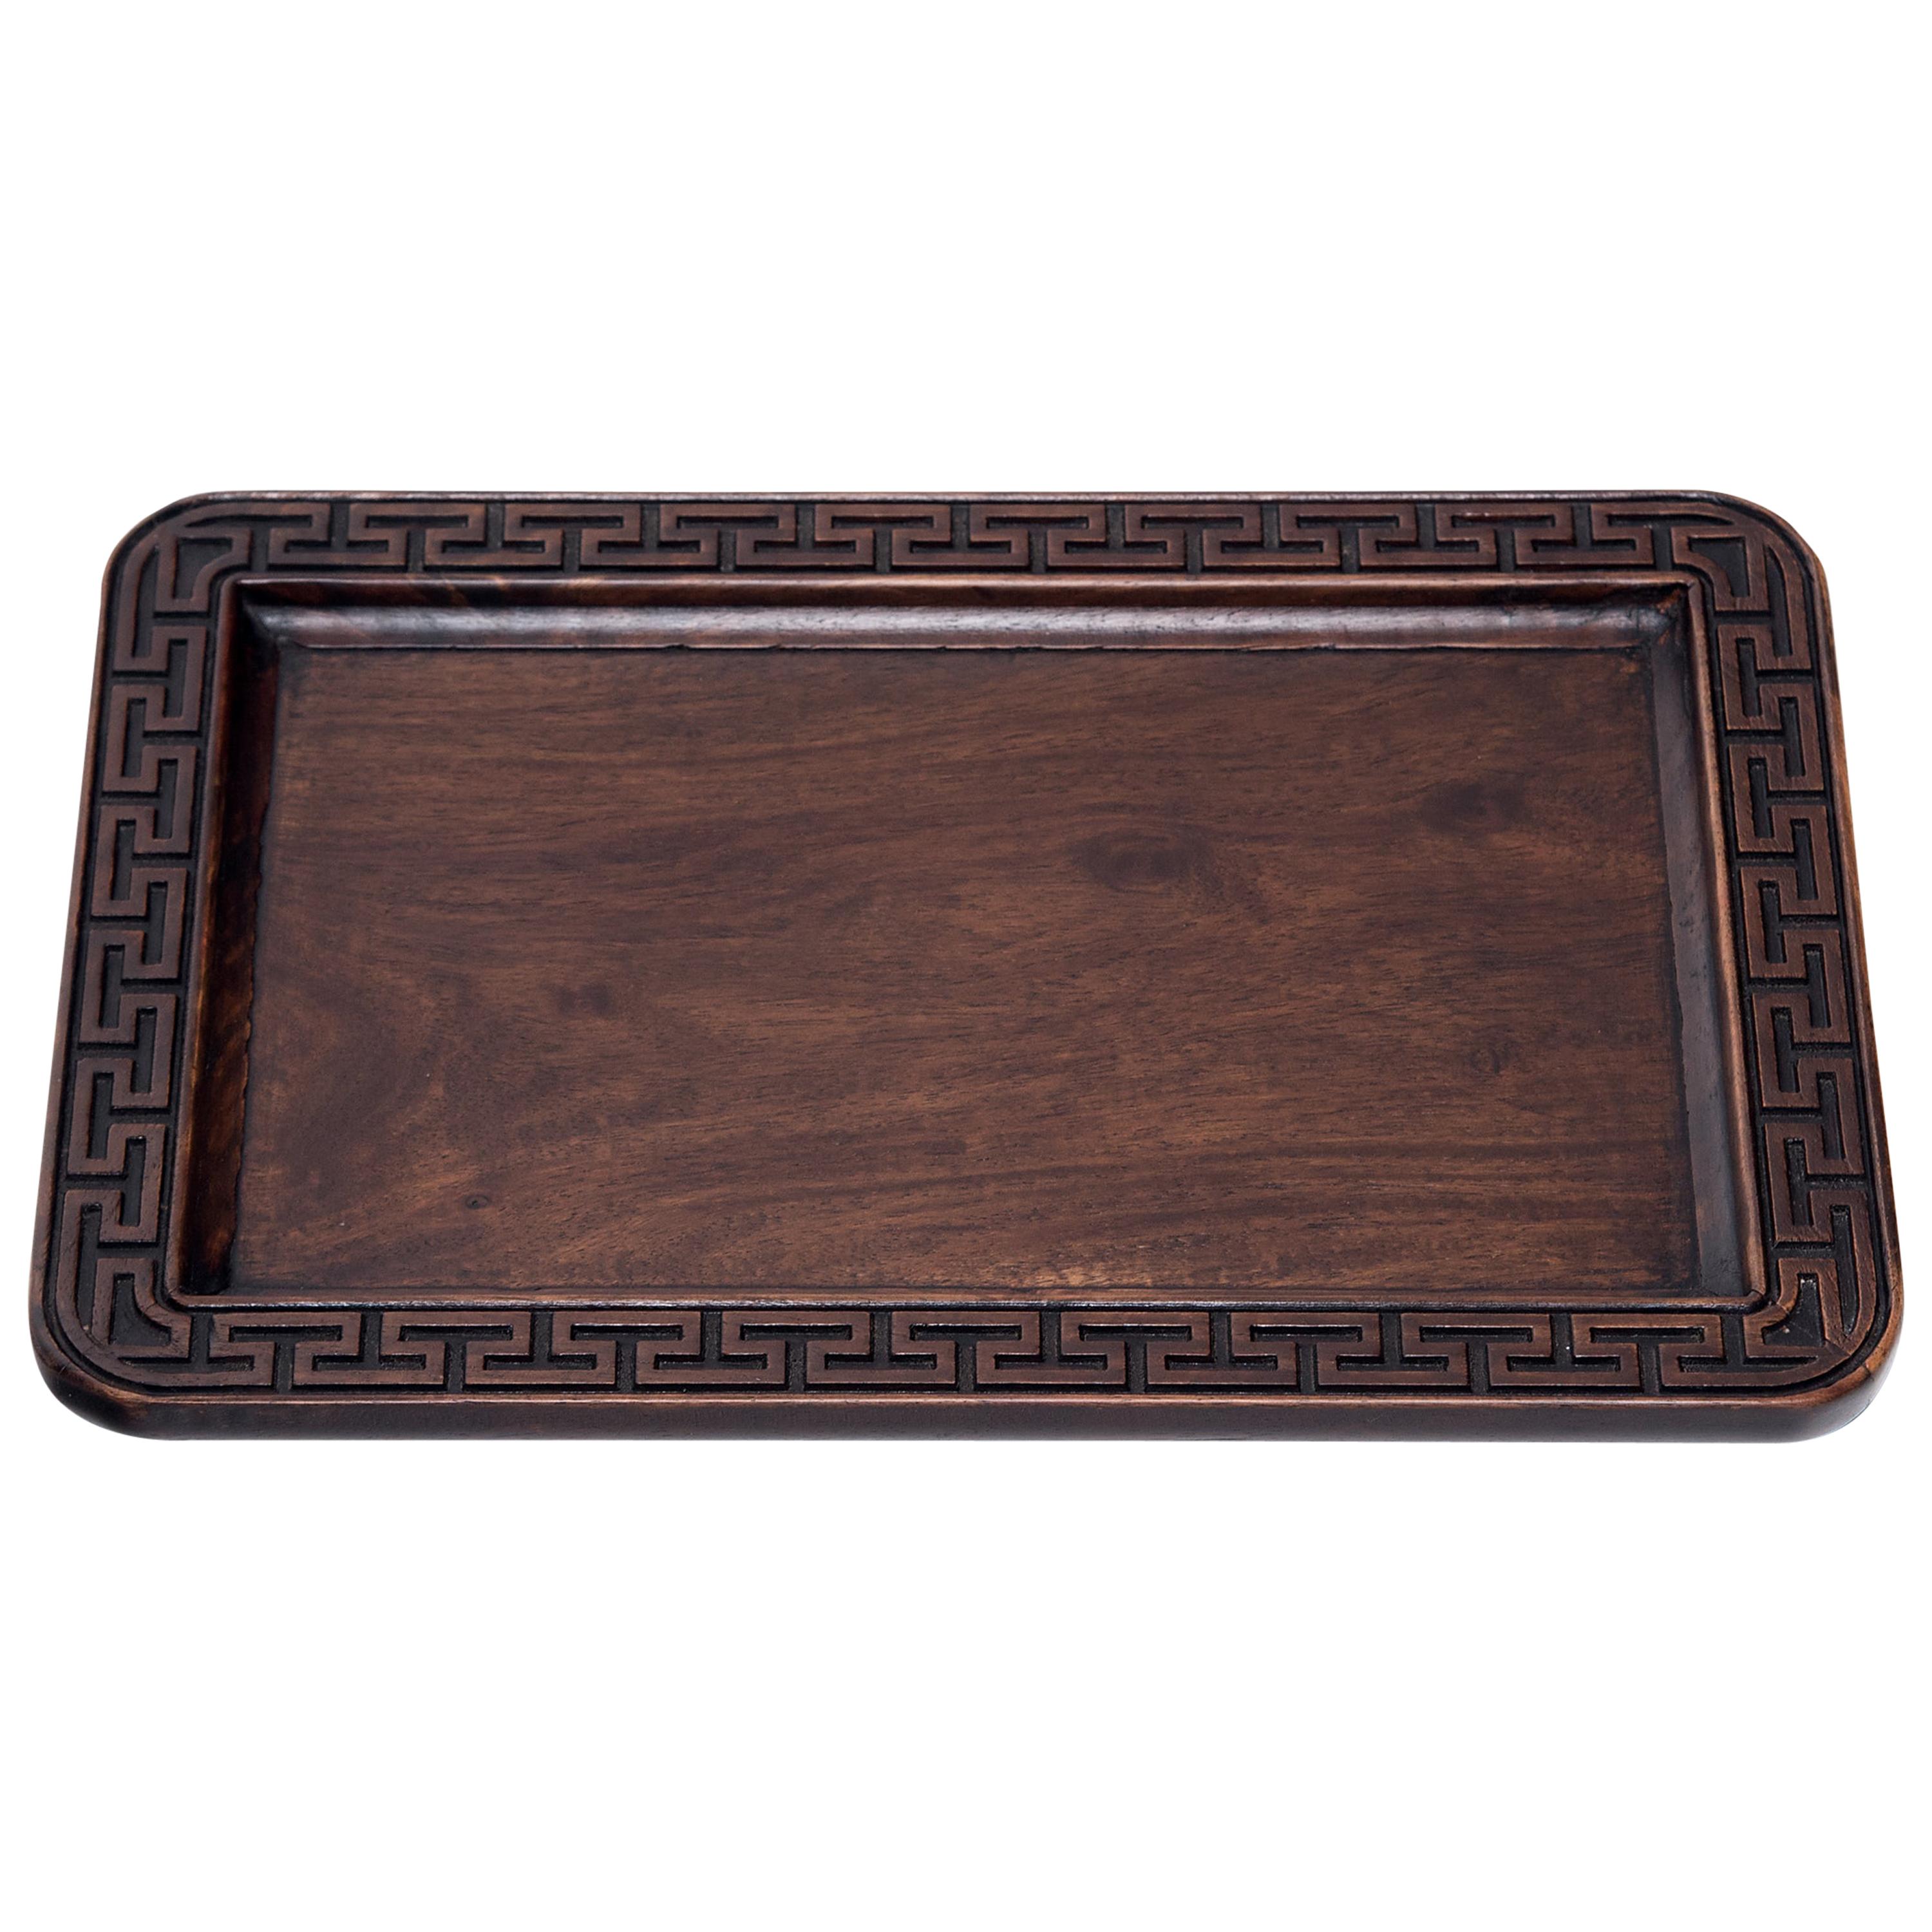 Chinese Meandering Tea Tray, circa 1900